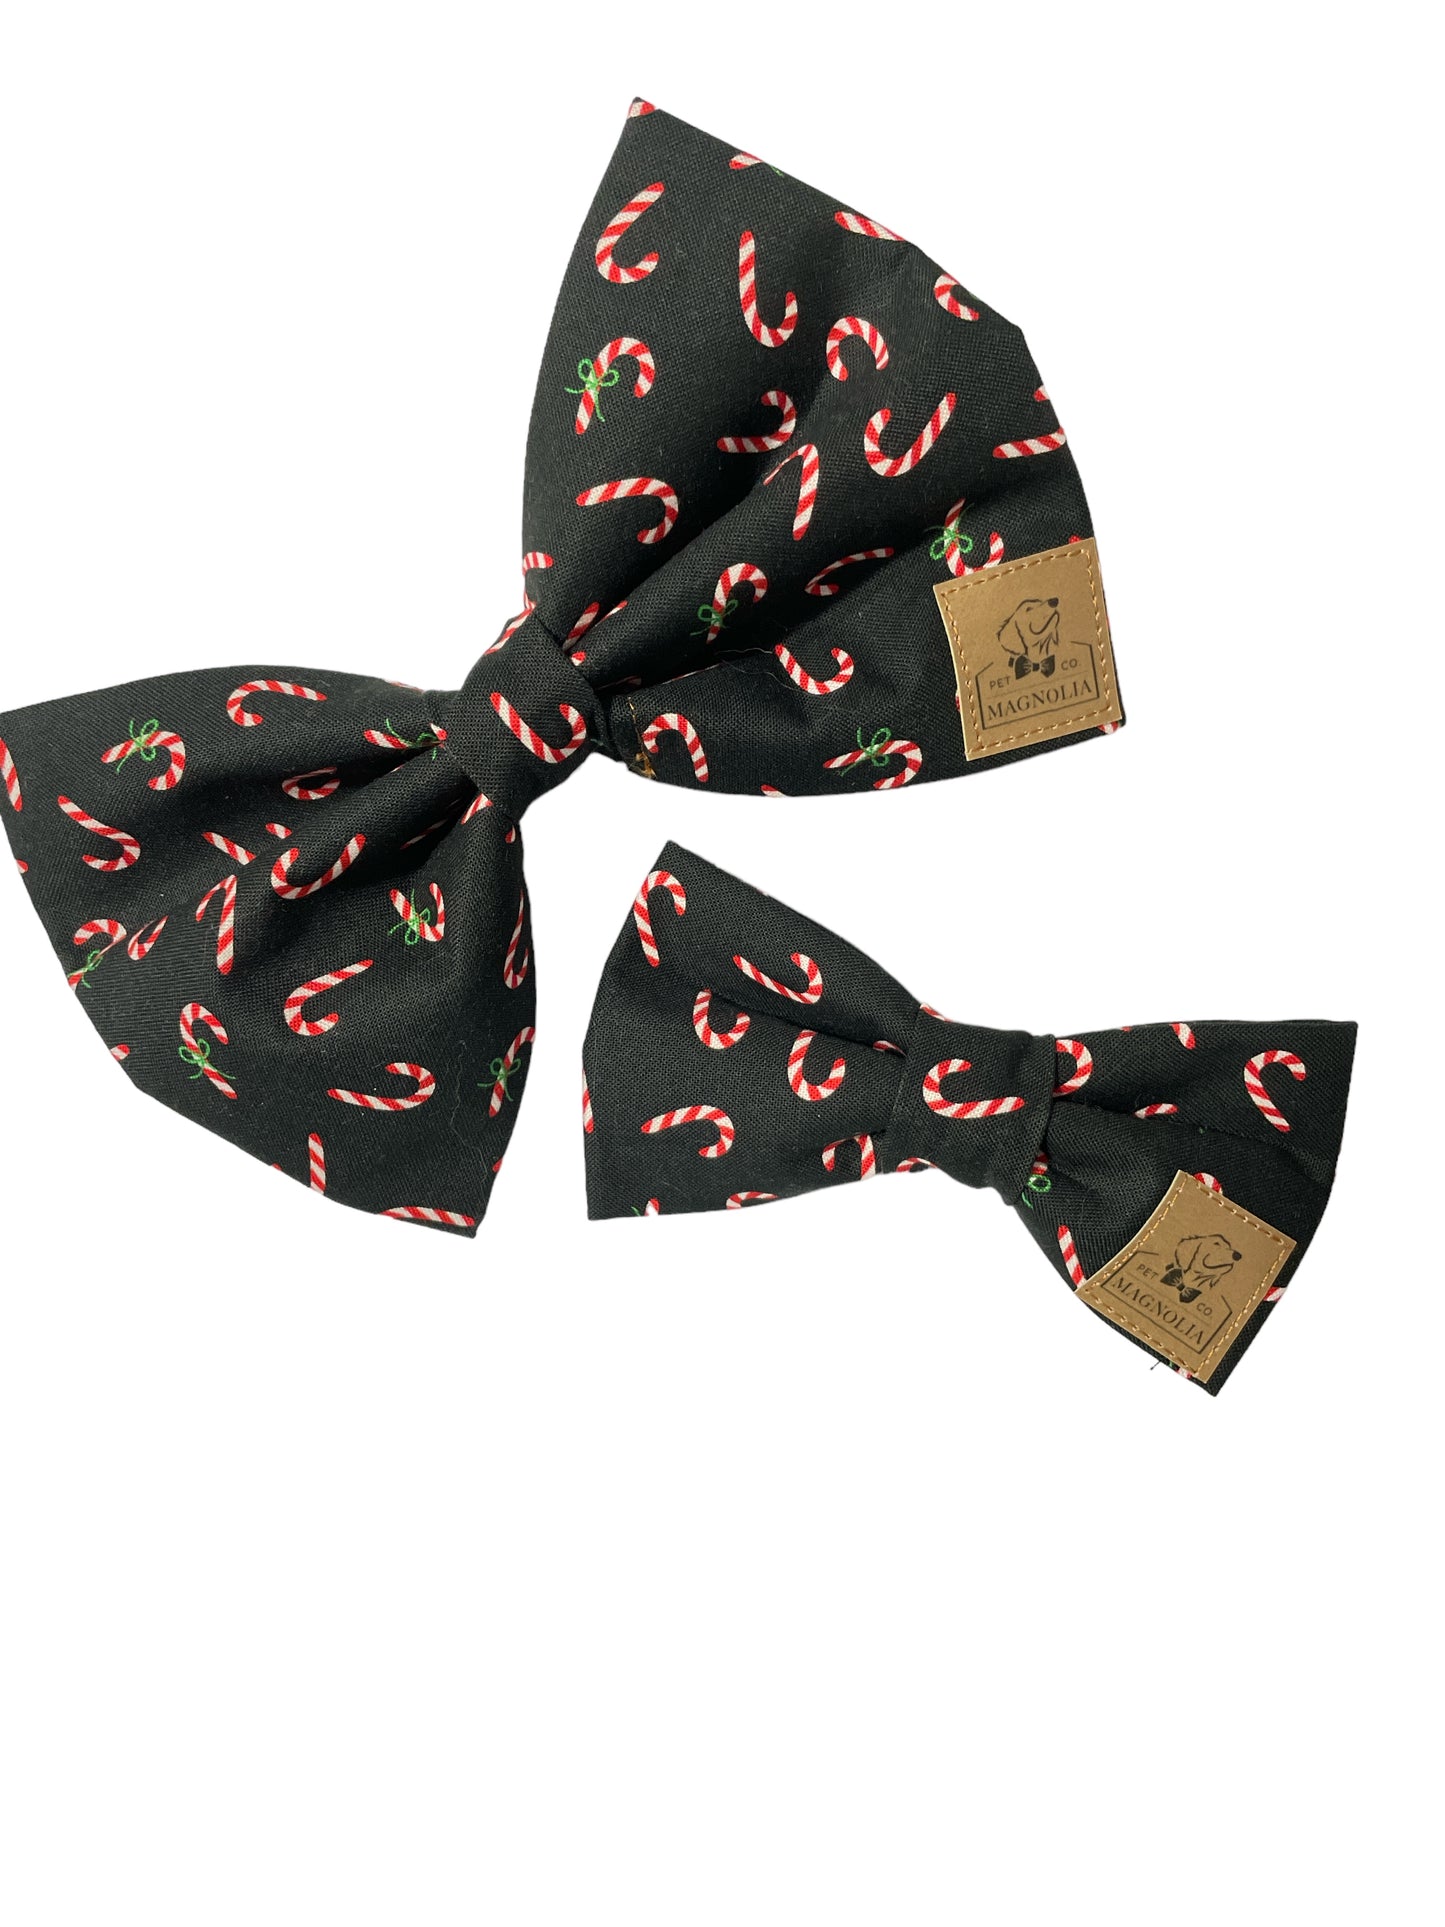 Candy Canes on Black Bow Tie